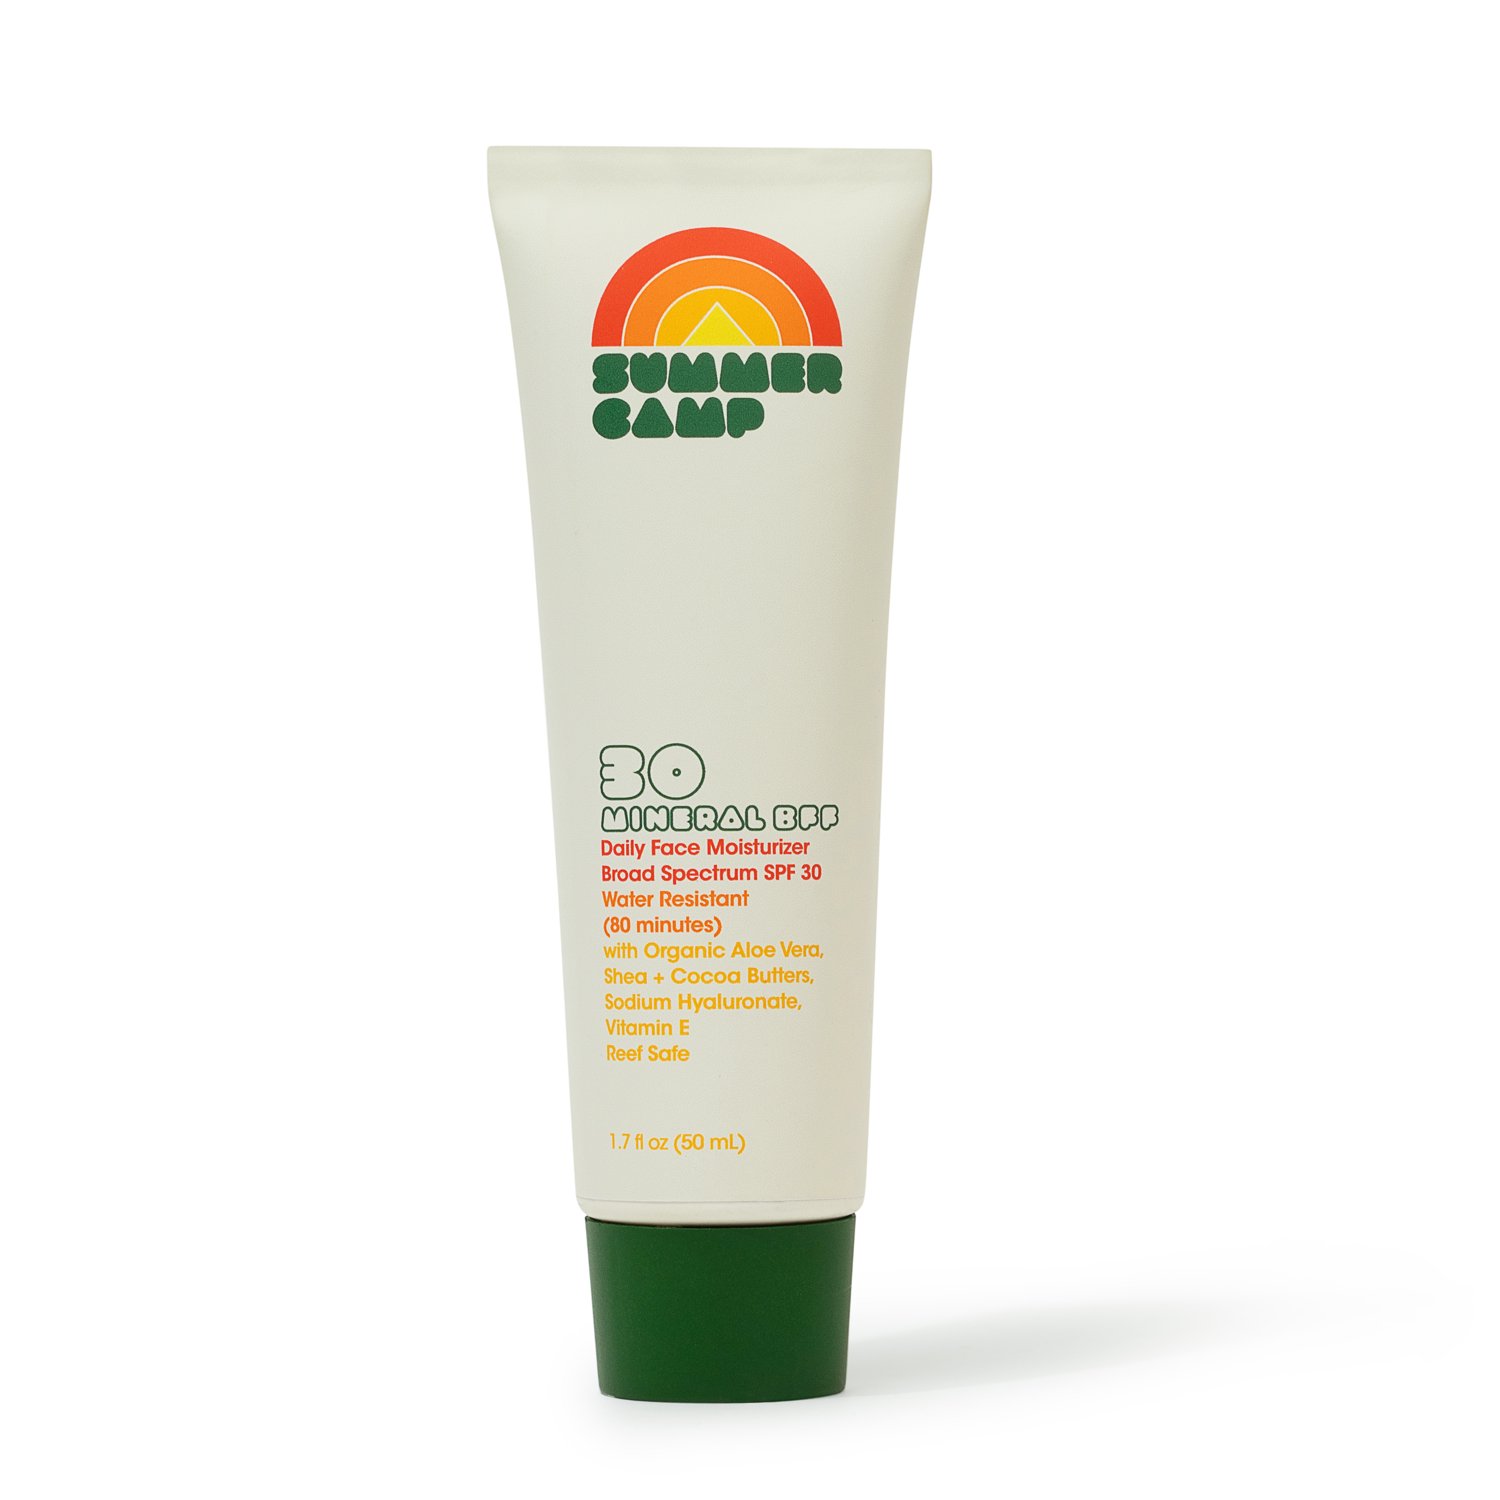 Summer Camp Mineral BFF Daily Face Moisturizer SPF 30 - image 1 of 5